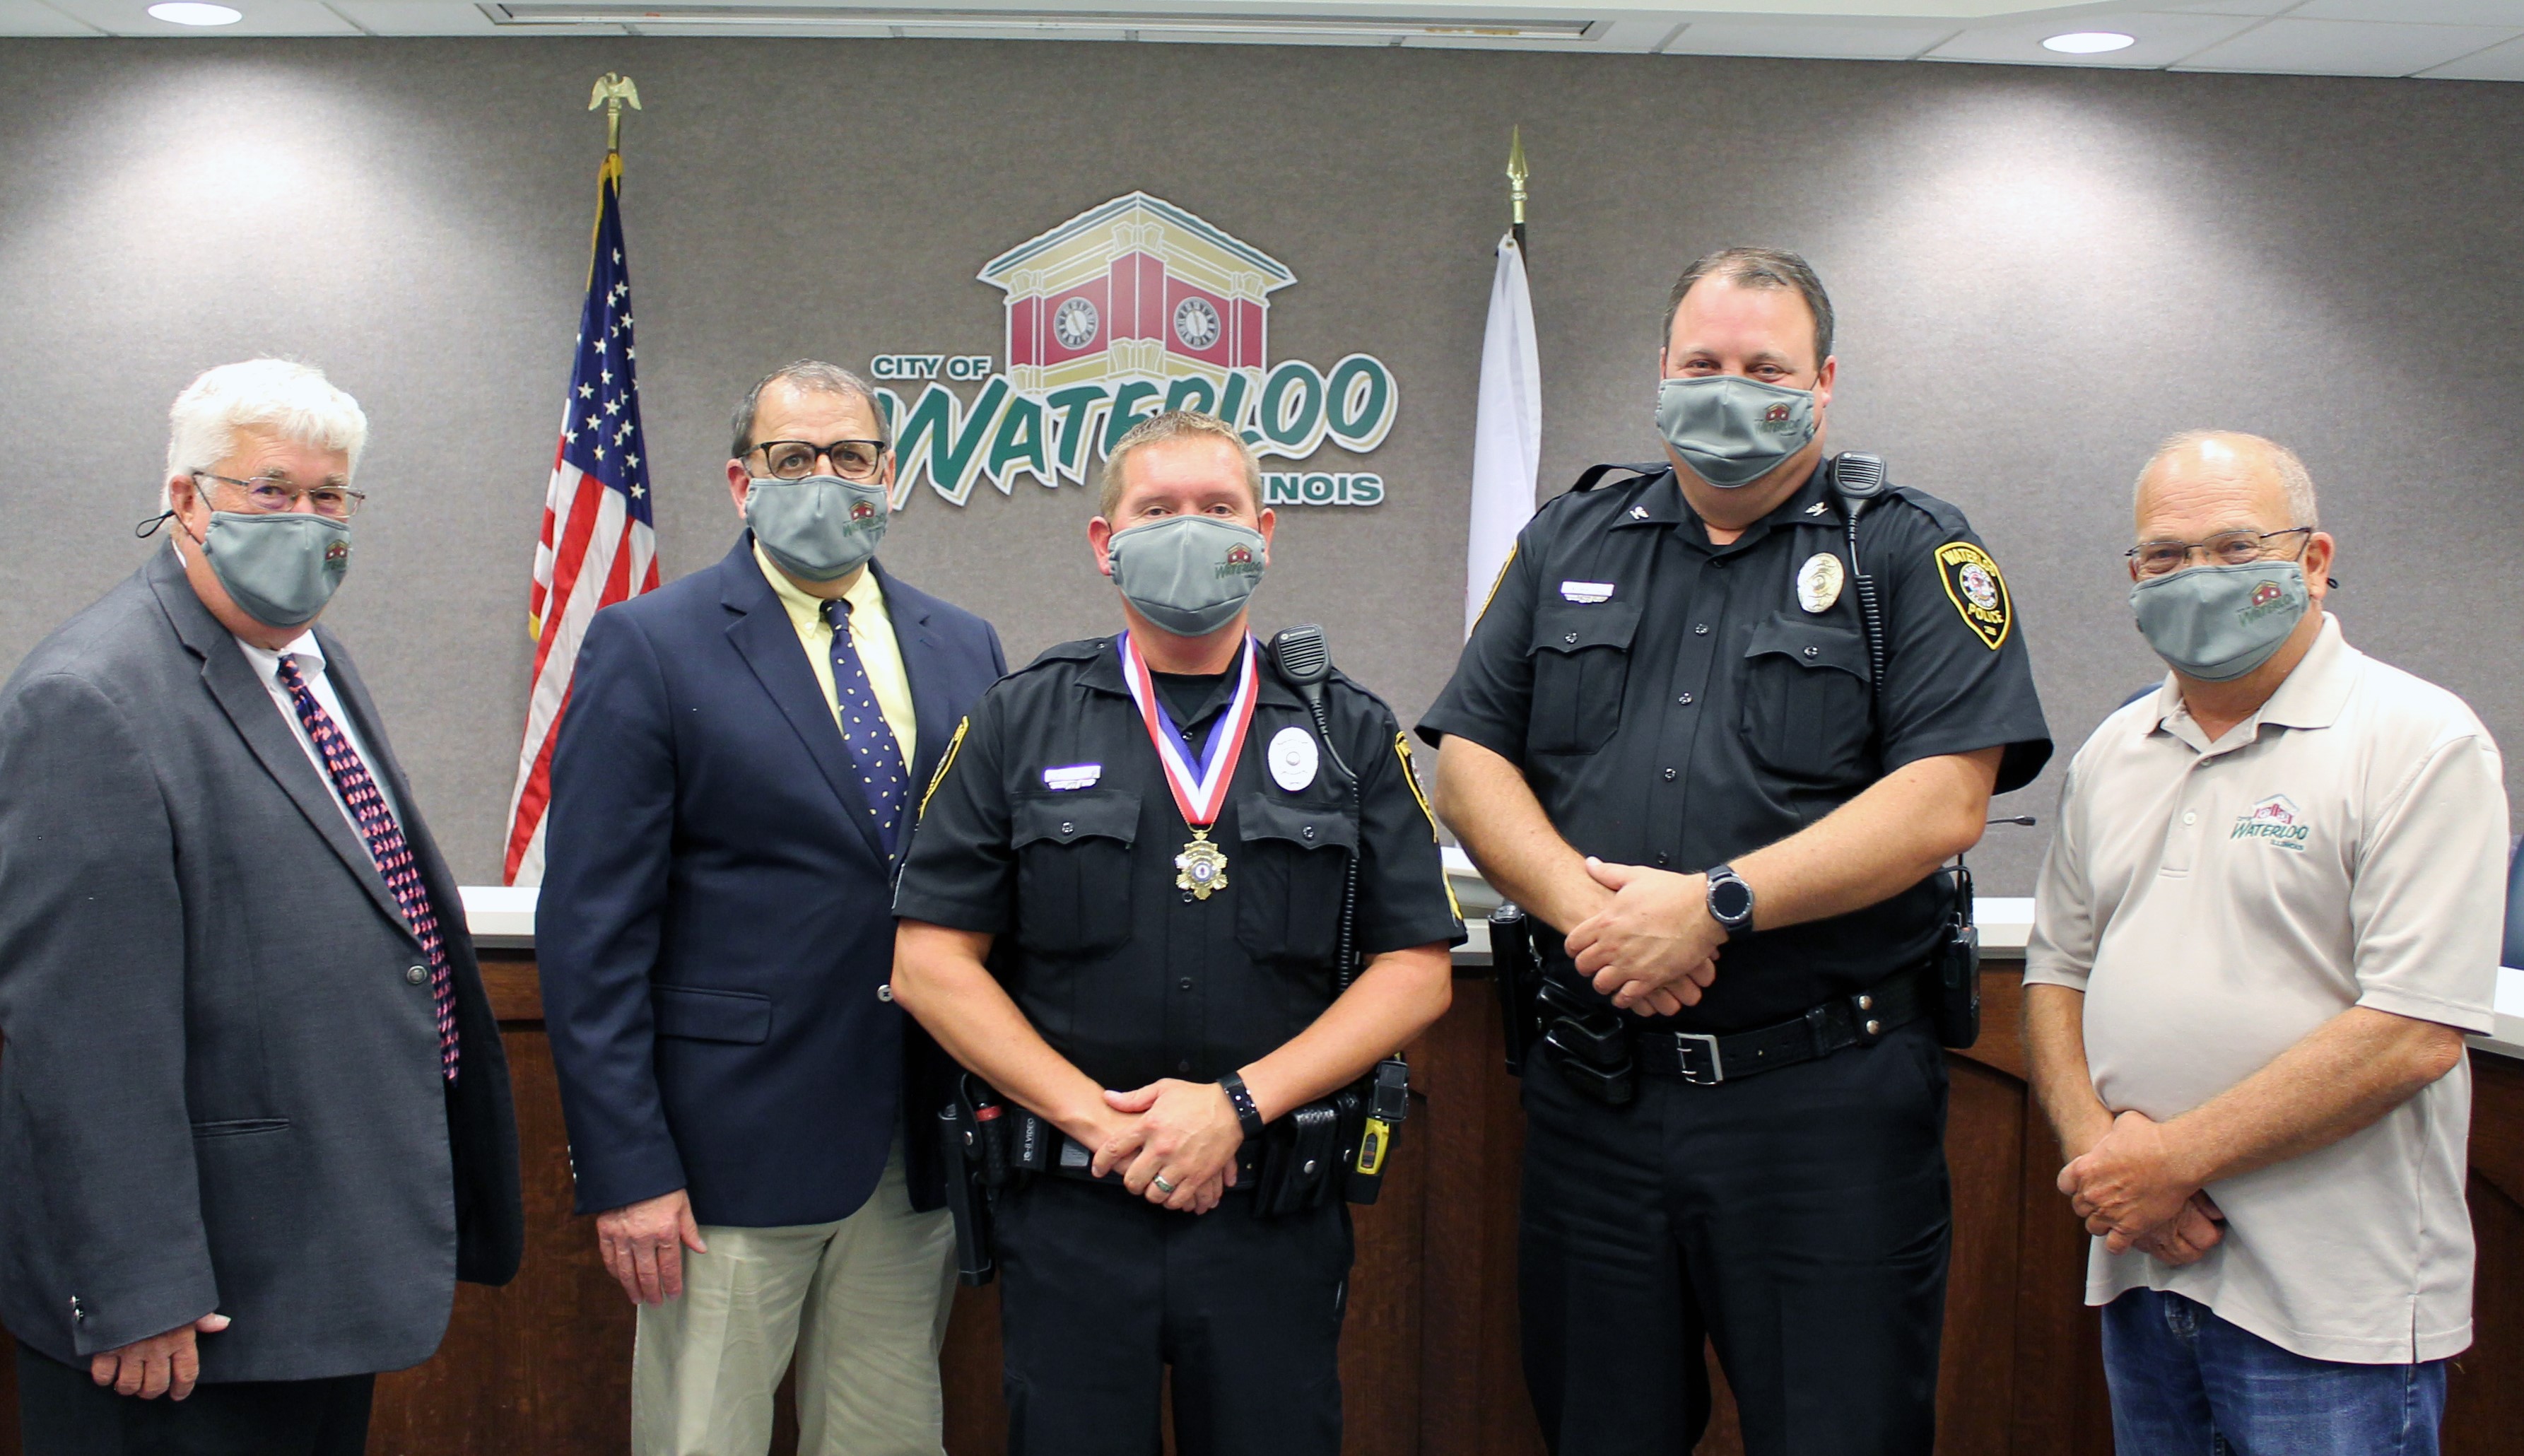 Waterloo's Daws receives Medal of Valor